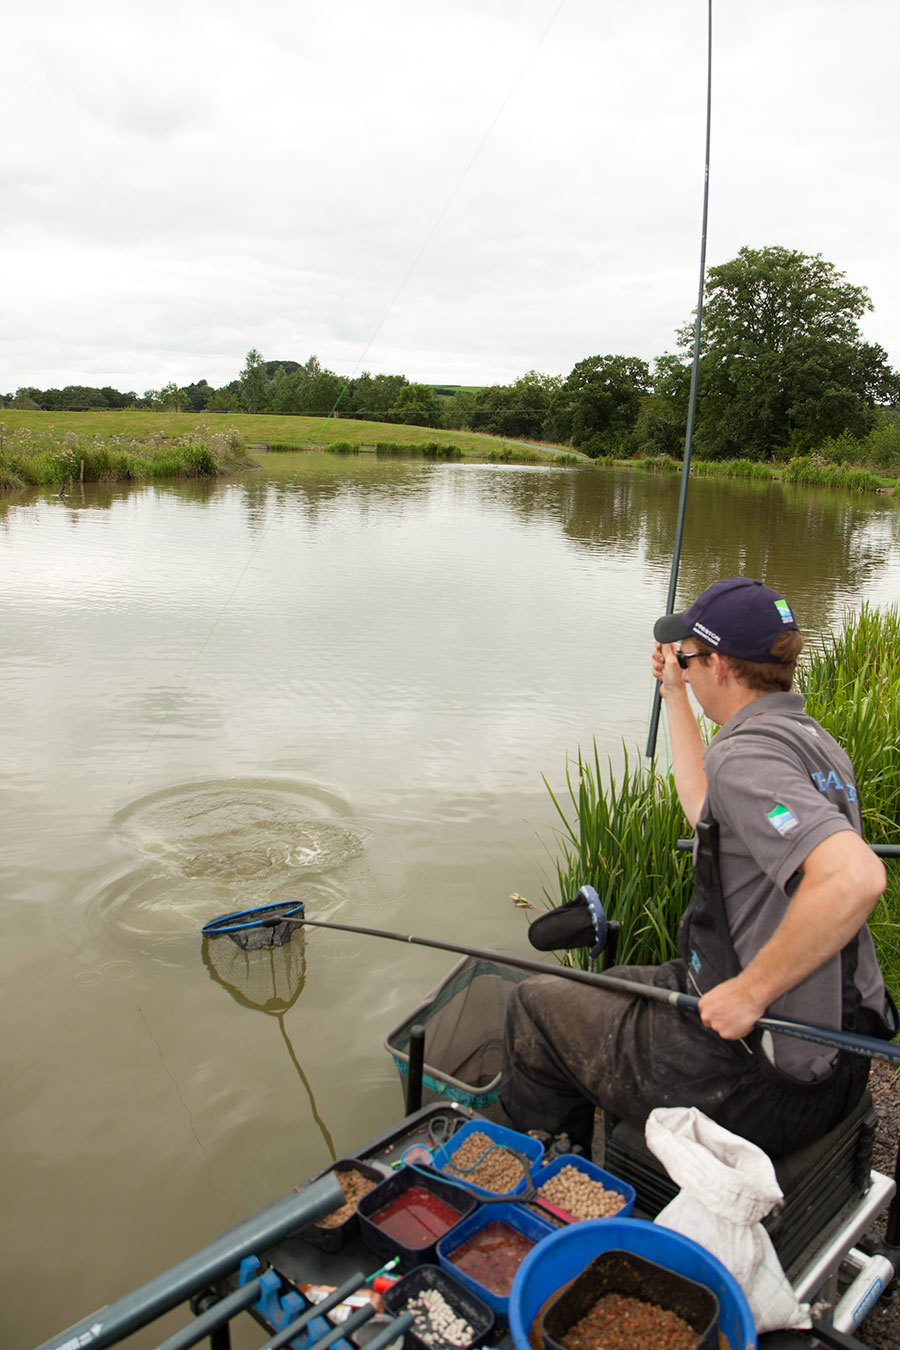 https://www.prestoninnovations.com/globalassets/media---preston/articles/how-to-catch-more-fish-up-in-the-water/andy_fishing-1.jpg